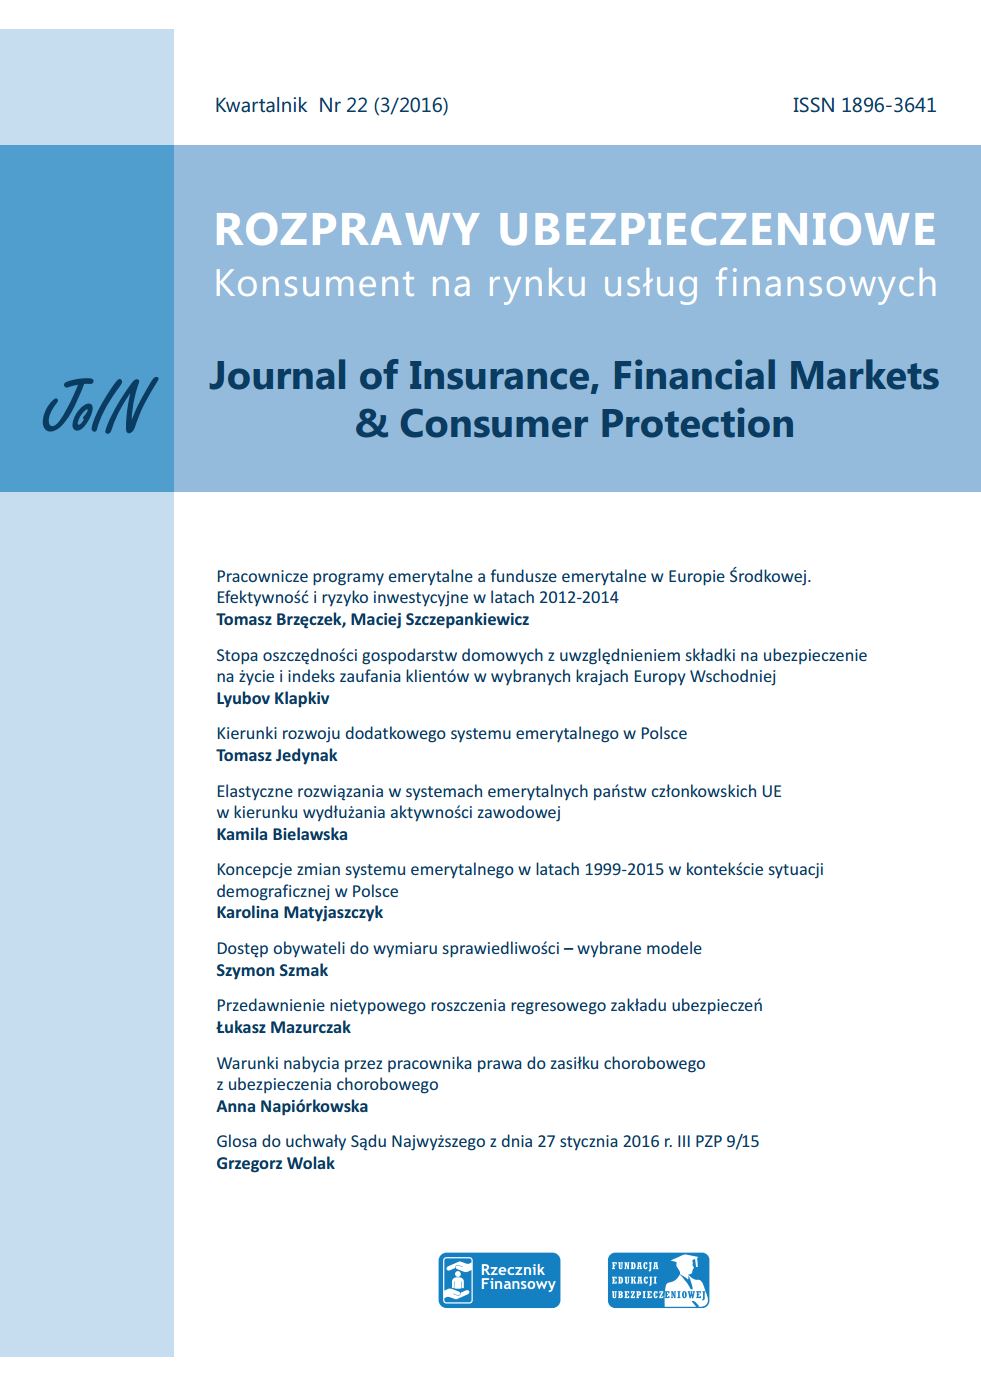 Occupational pension schemes vs. pension funds in Central Europe. Efficiency and investment risk in the years 2012-2014 Cover Image